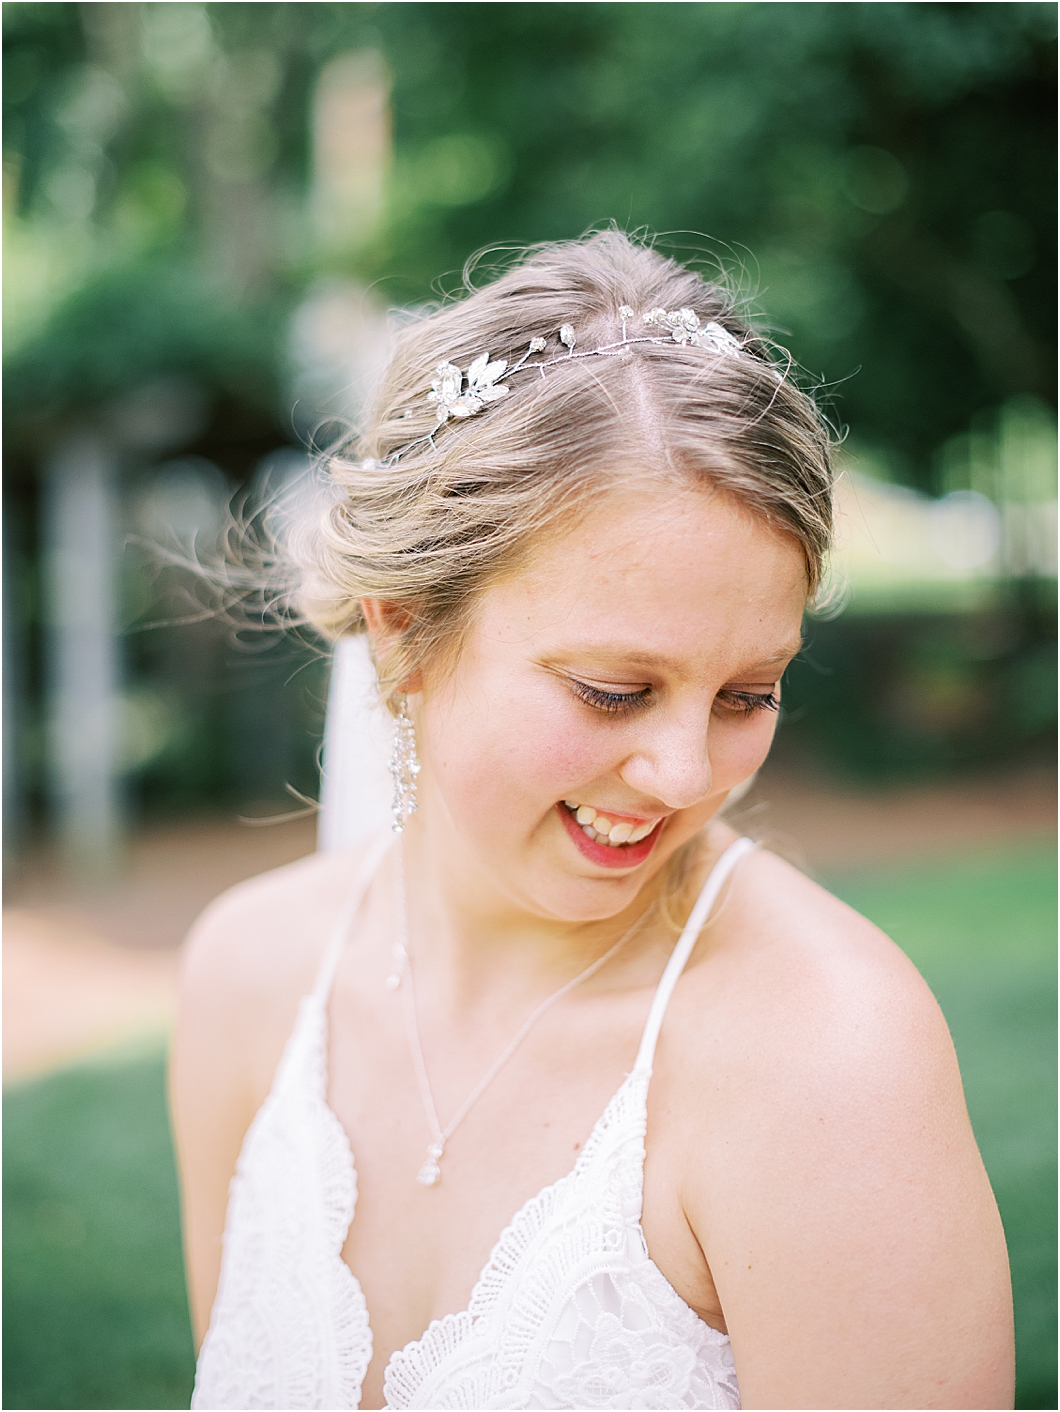 Intimate Wedding during COVID at Tanglewood Park Arboretum by Hillary Muelleck